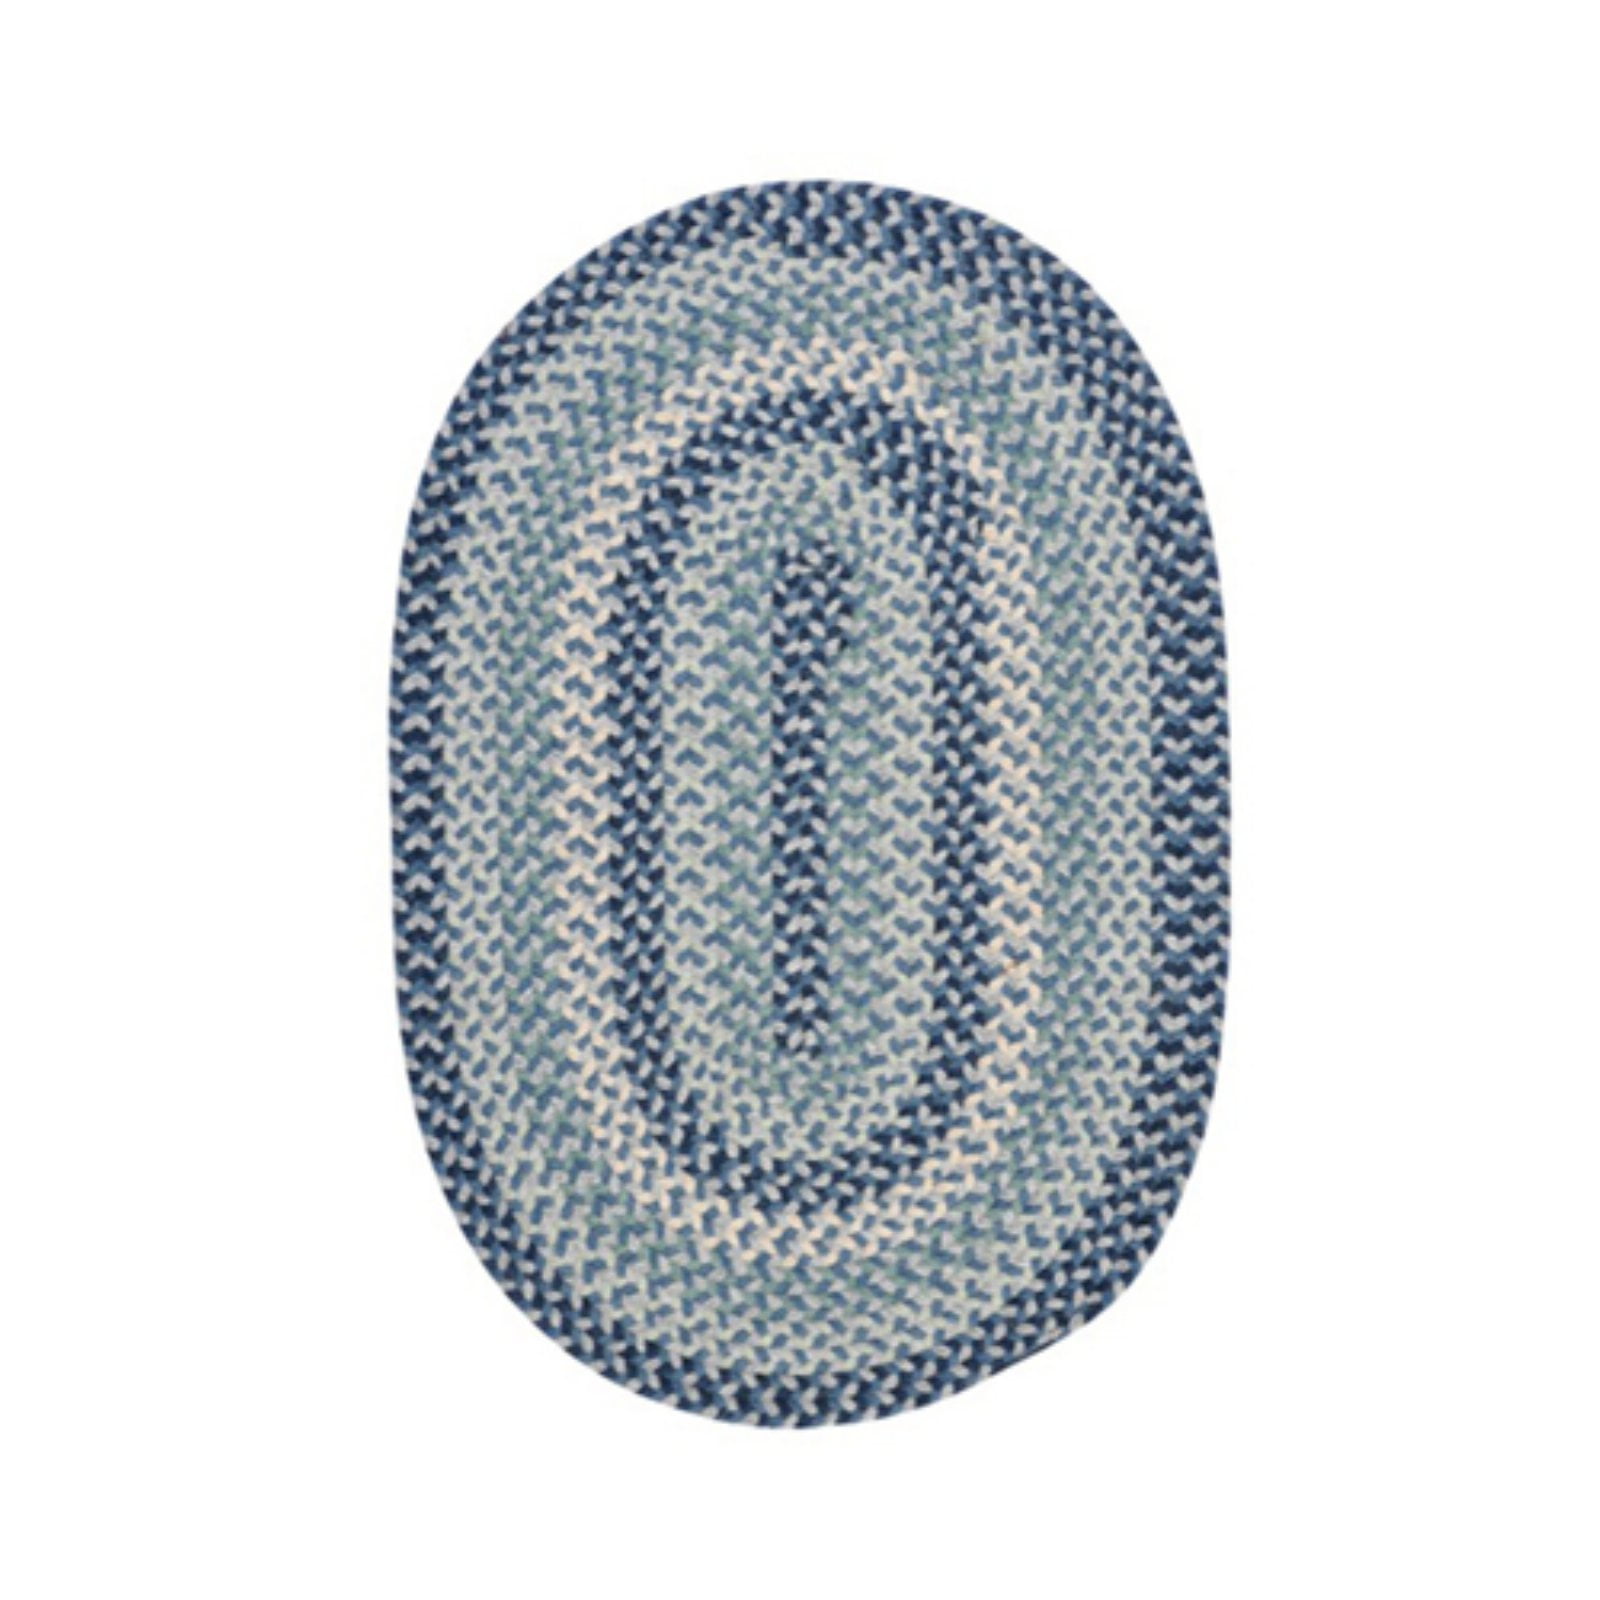 Bc53r024x132 2 X 11 Ft. Boston Common Oval Rug, Capeside Blue